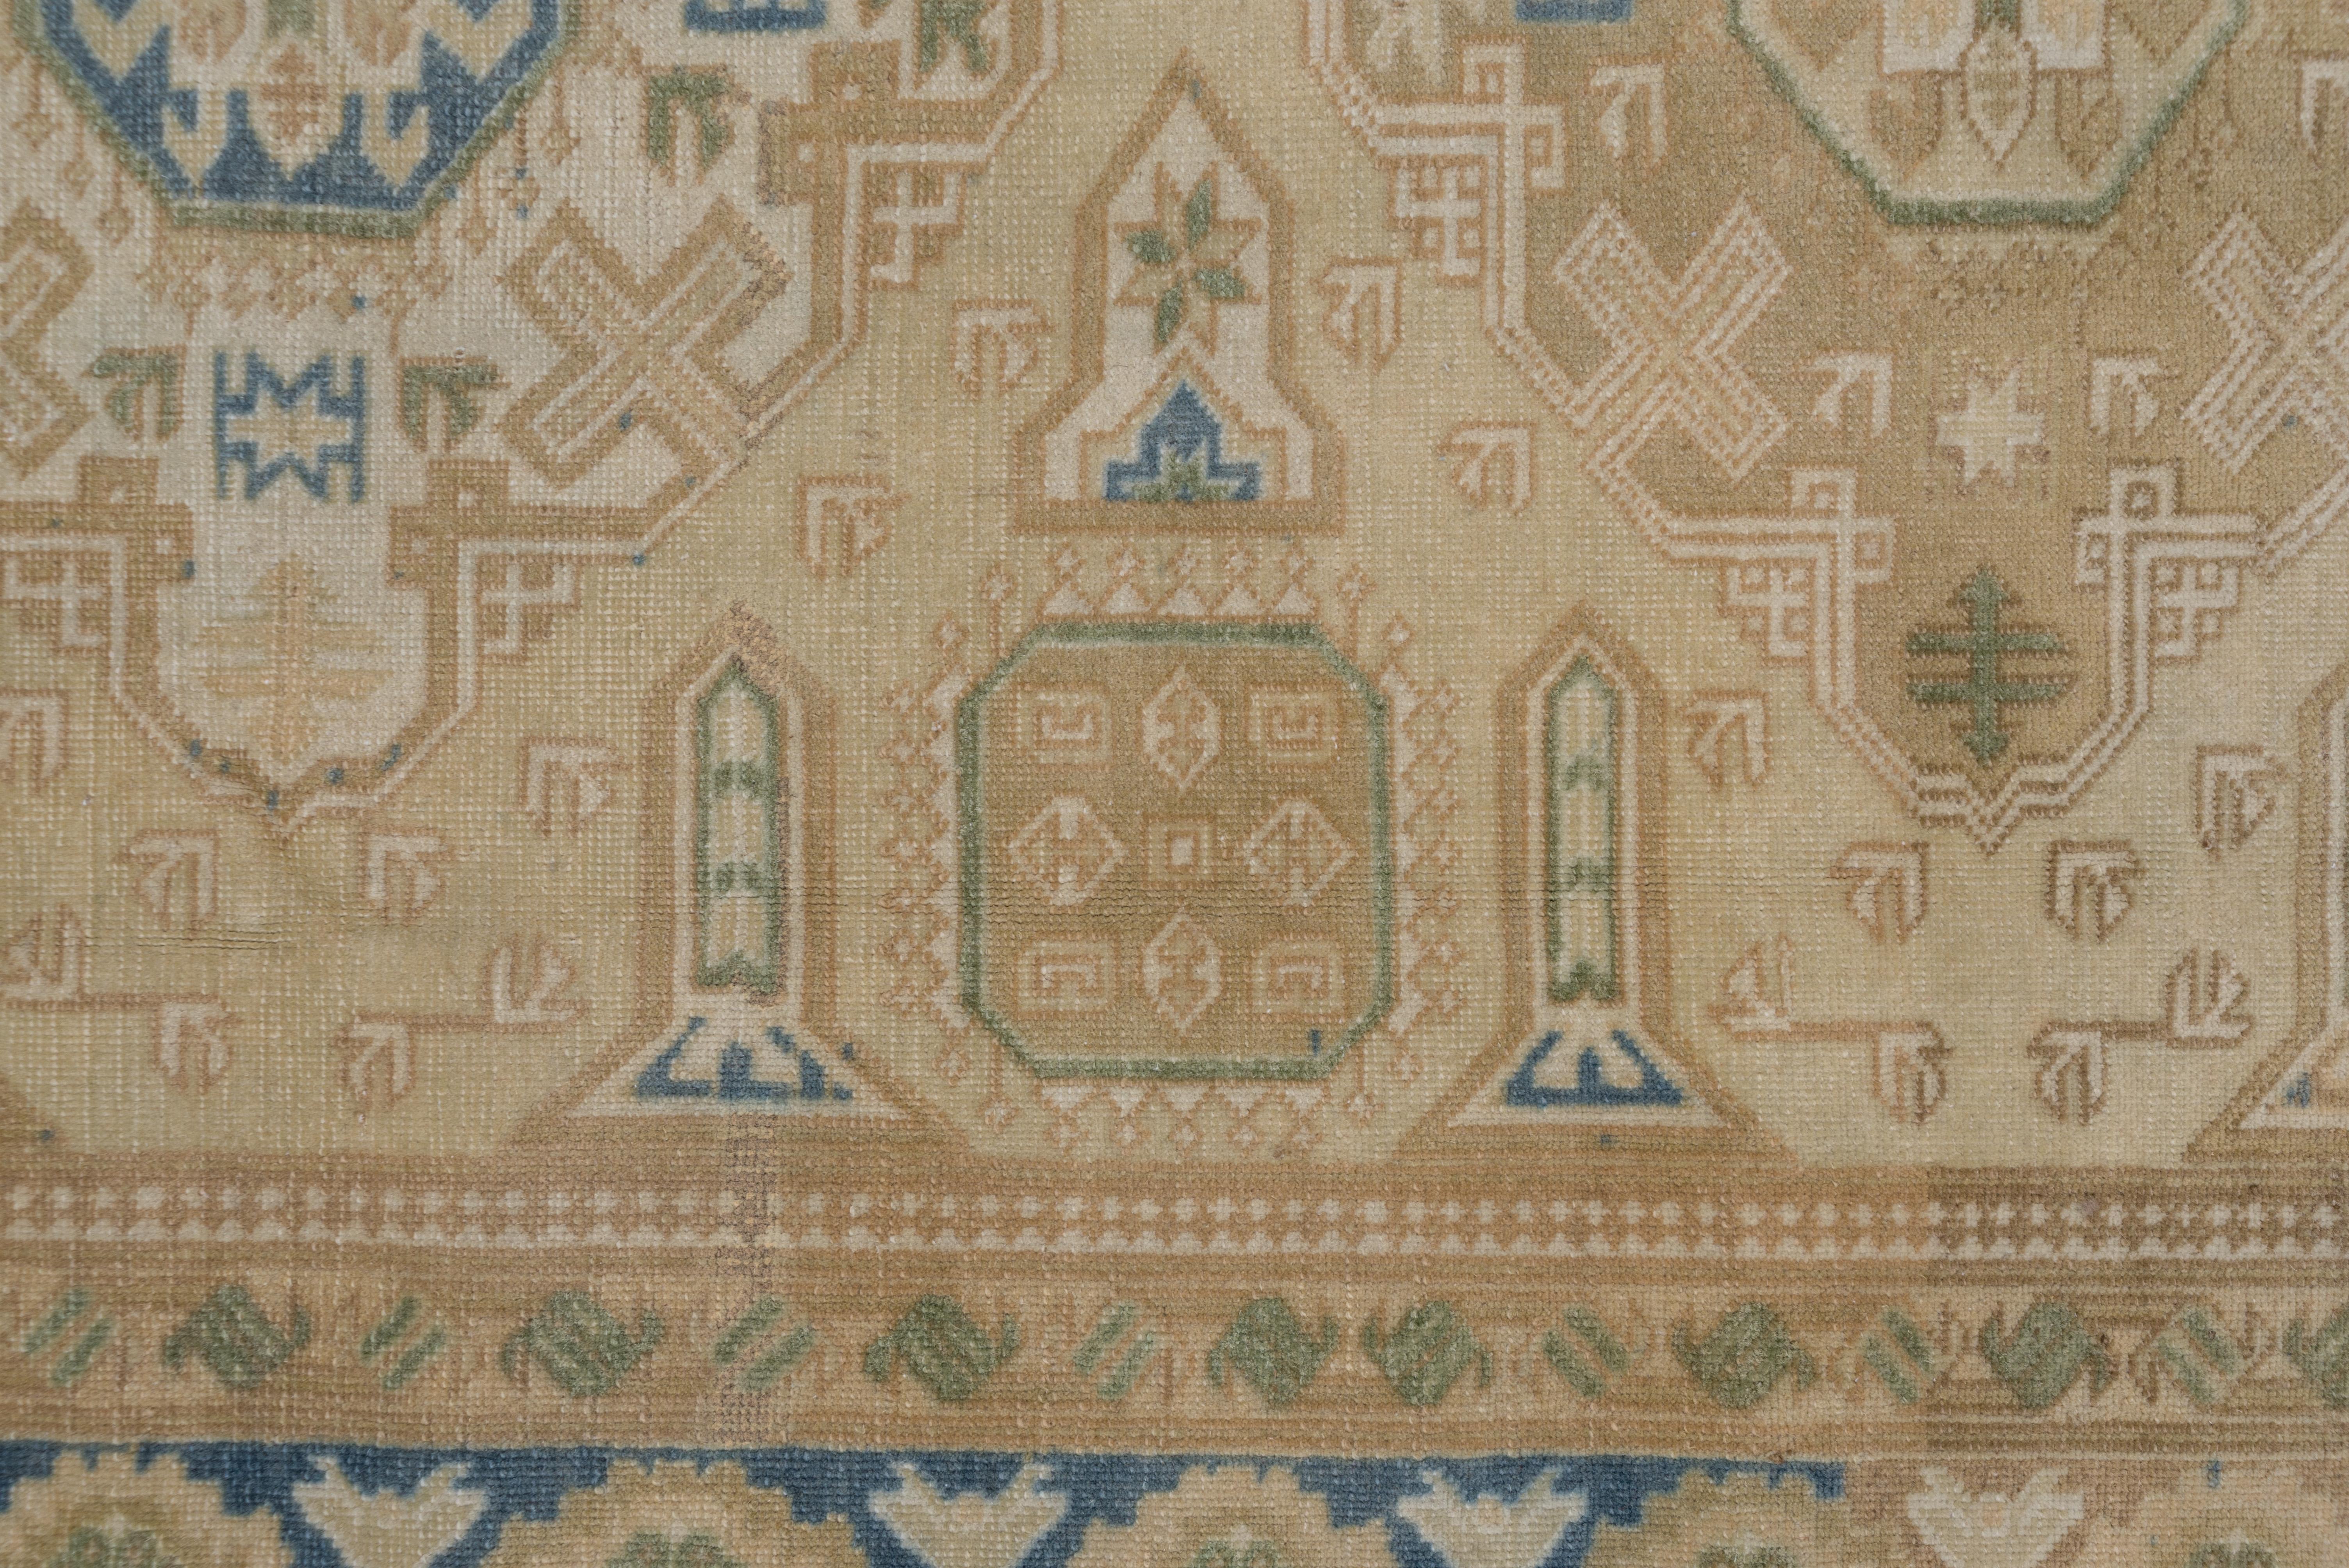 Hand-Knotted Antique Turkish Oushak Rug, Camel & Beige Palette, Green & Blue Accents